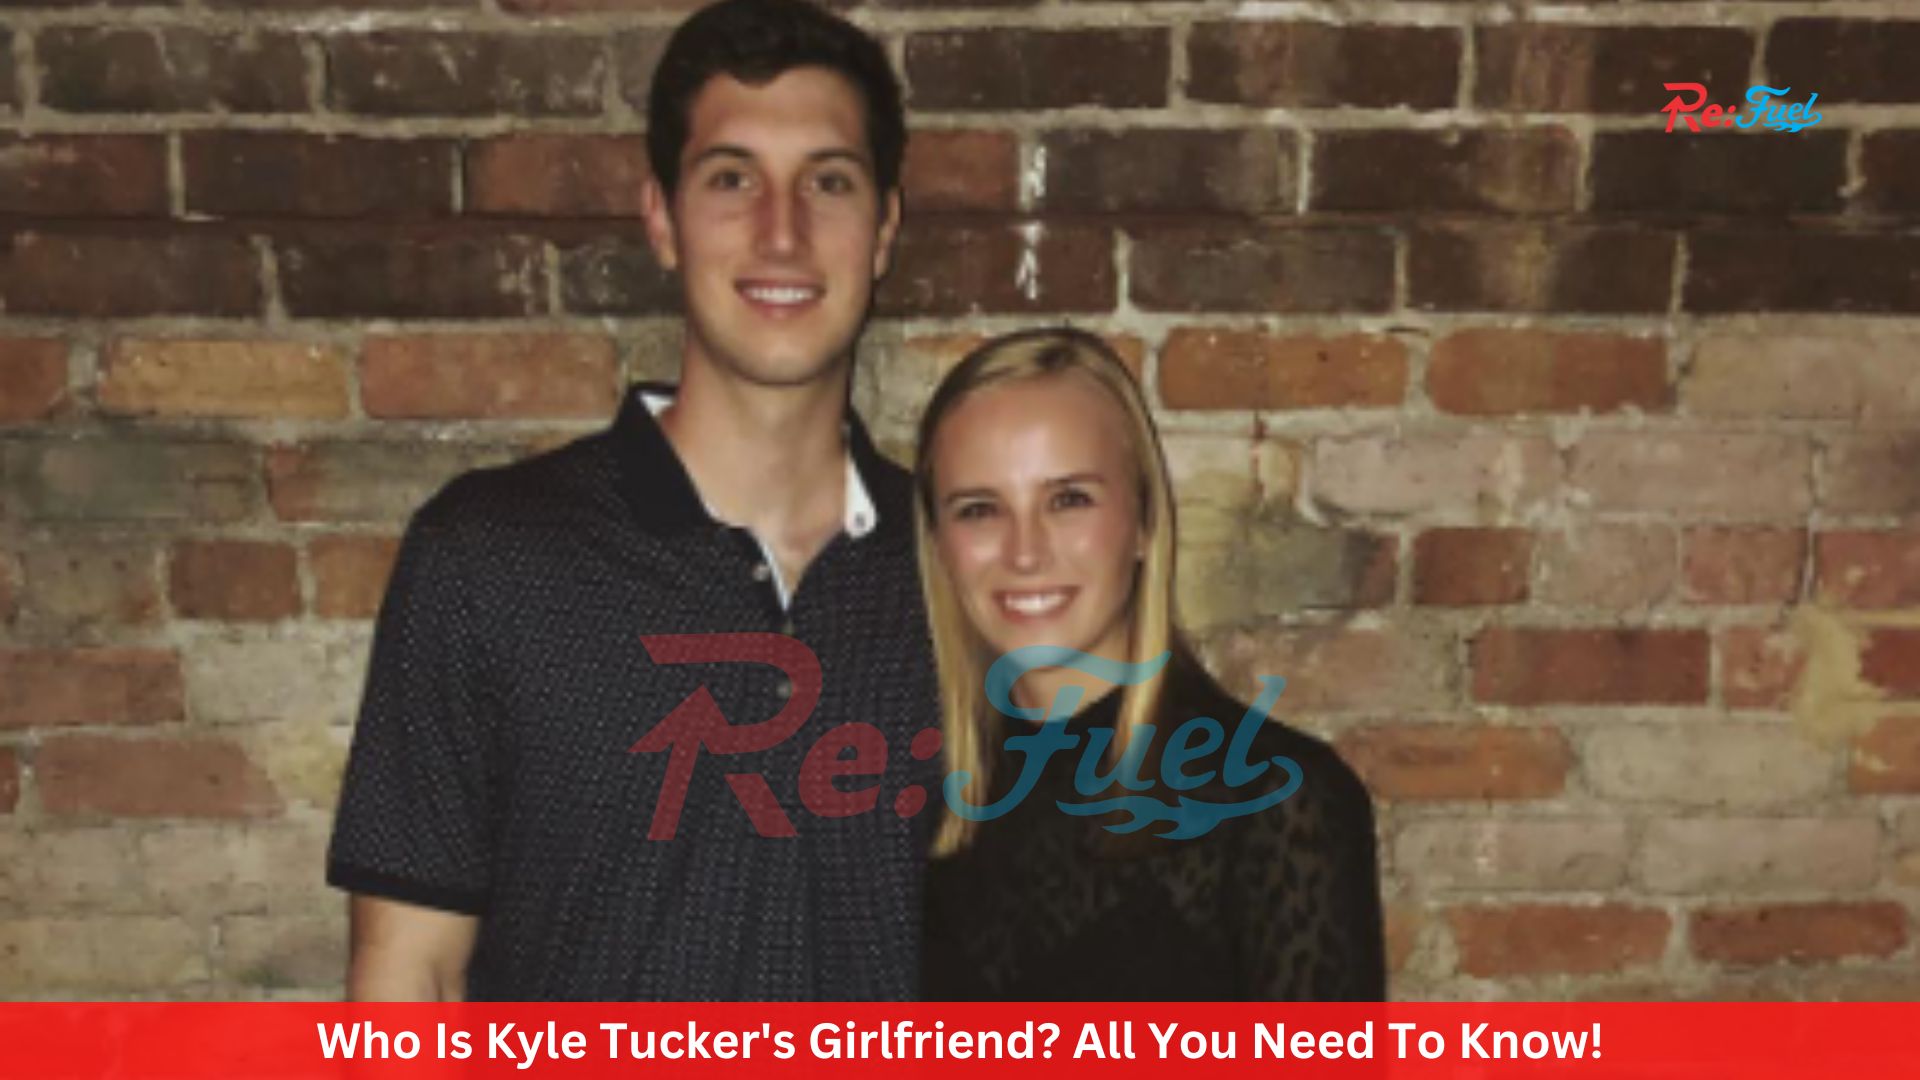 Who Is Kyle Tucker's Girlfriend? All You Need To Know!